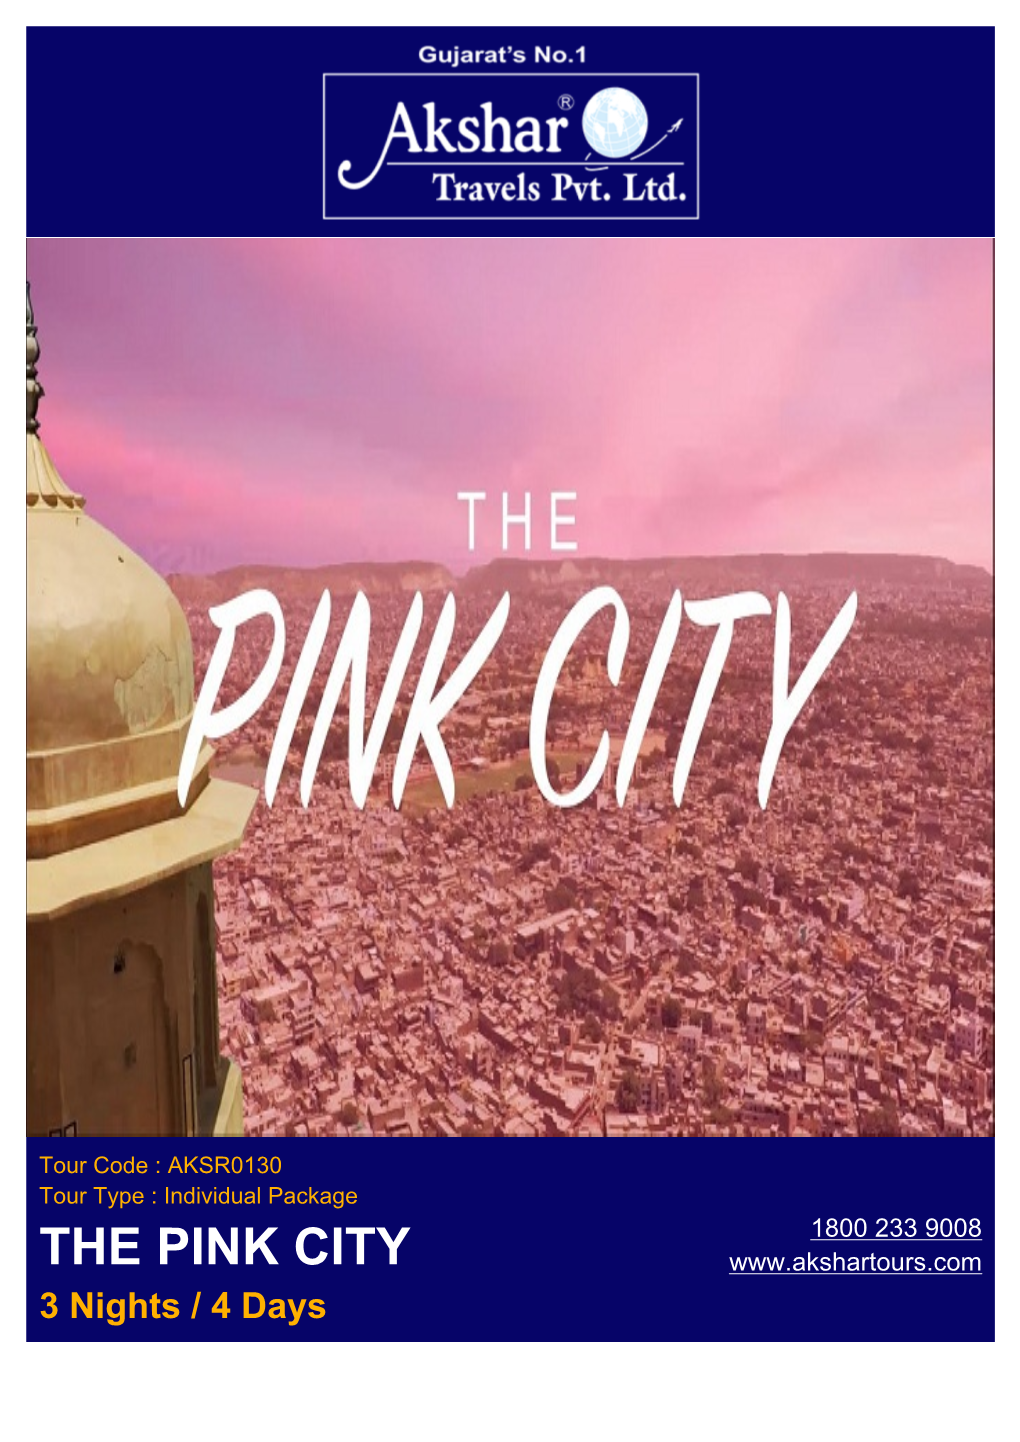 THE PINK CITY 3 Nights / 4 Days PACKAGE OVERVIEW